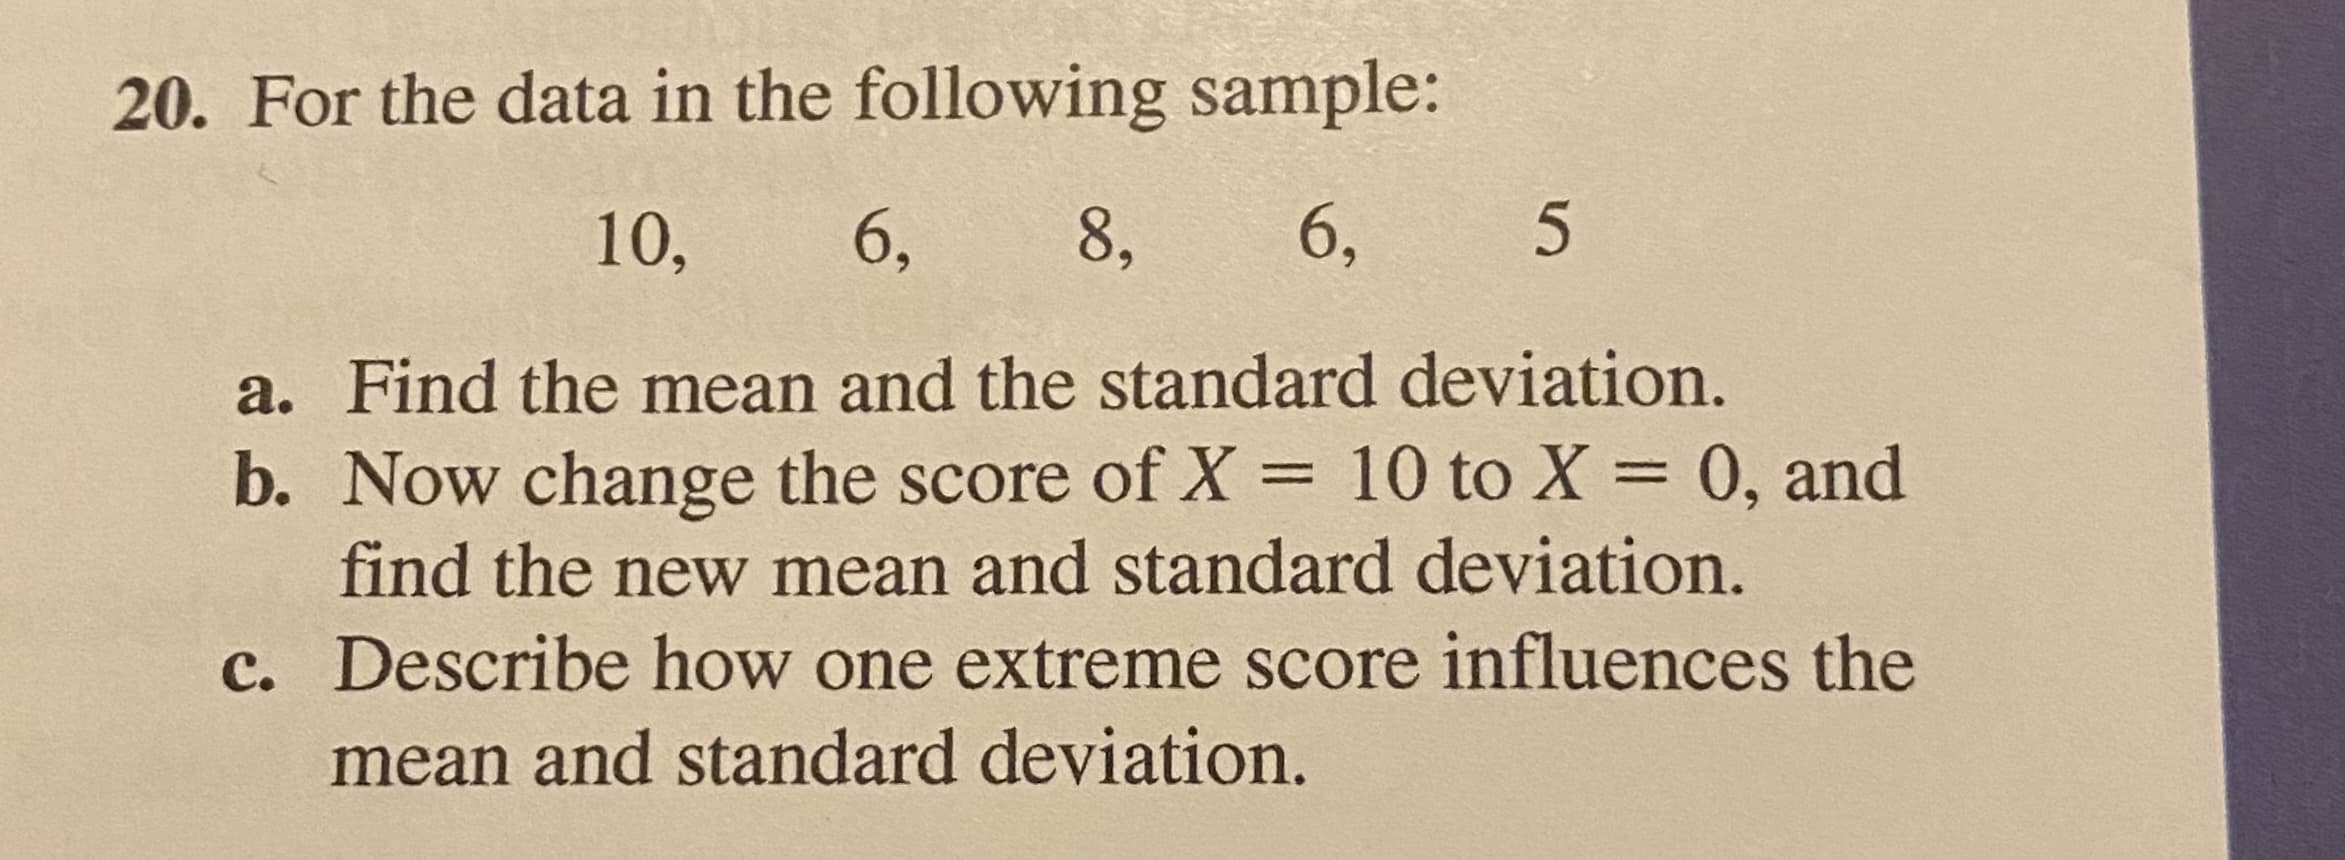 20. For the data in the following sample:
10,
6,
8,
6,
a. Find the mean and the standard deviation.
b. Now change the score of X = 10 to X = 0, and
find the new mean and standard deviation.
c. Describe how one extreme score influences the
mean and standard deviation.
